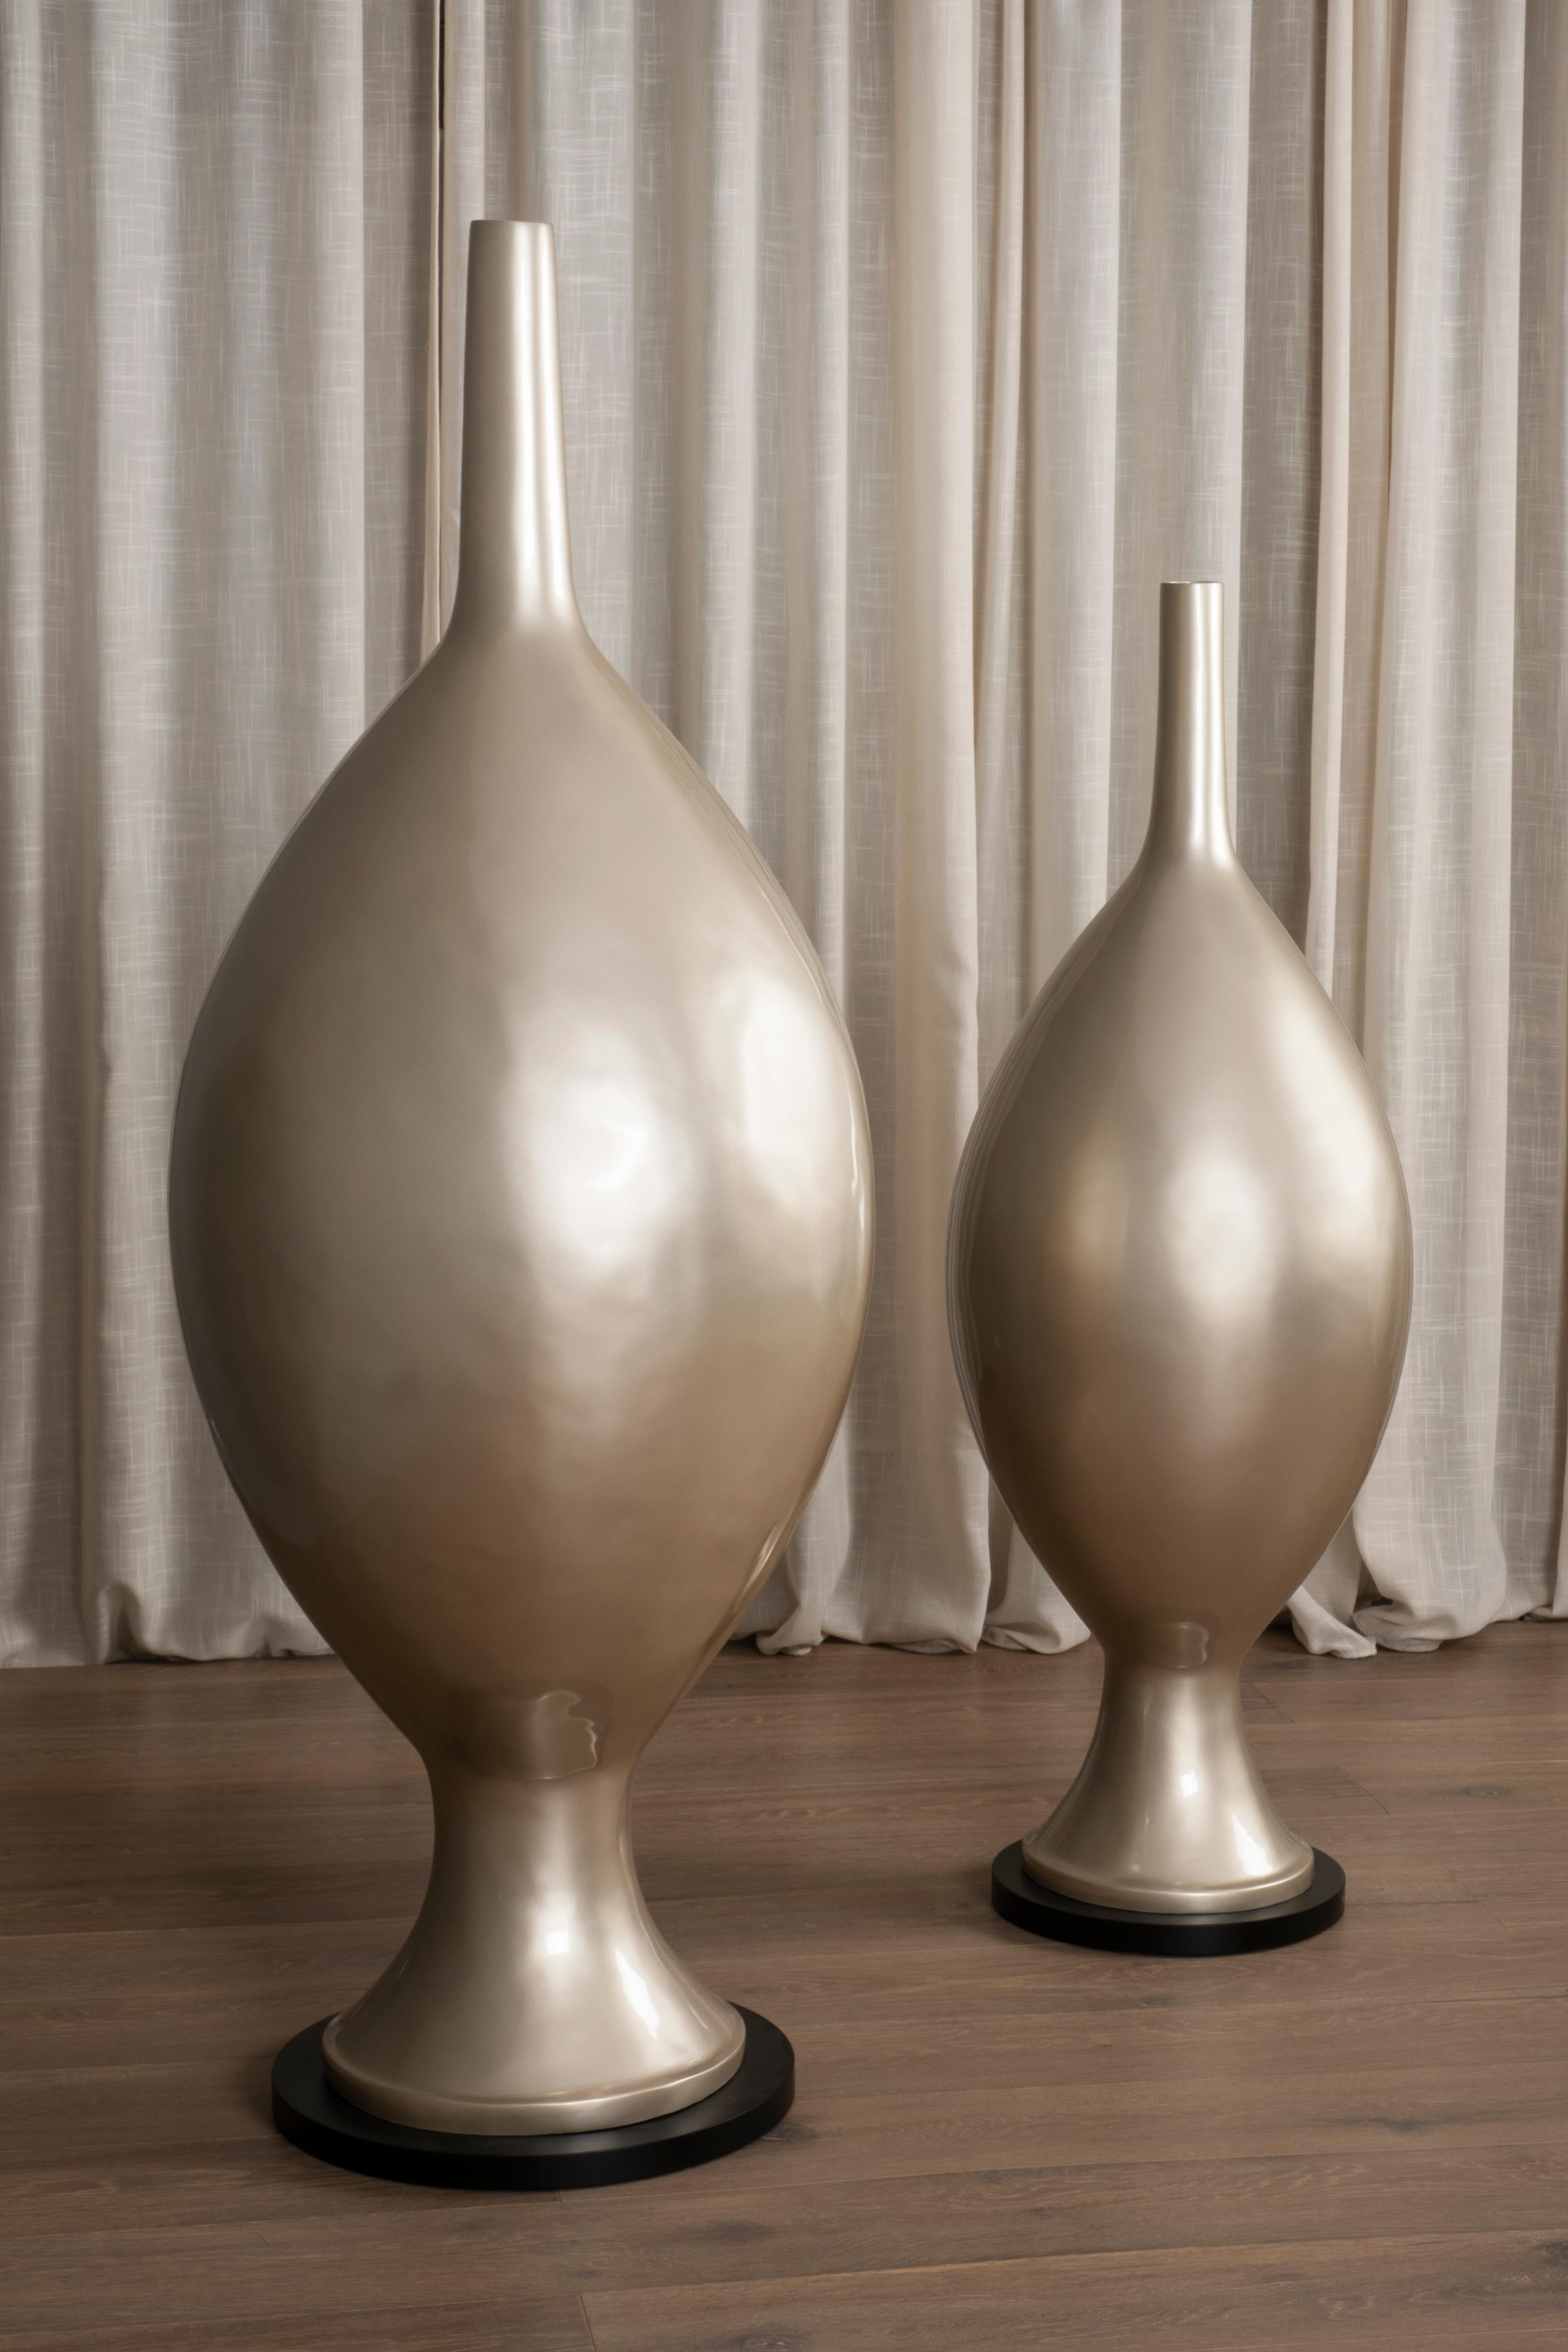 Set of 2 Decorative Floor Vases, Lusitanus Home Collection, by Lusitanus Home.

This beautiful set of two resin floor vases that catches the eye with its champagne elegant silhouette. These floor vases are the perfect decorative choice to enrich any